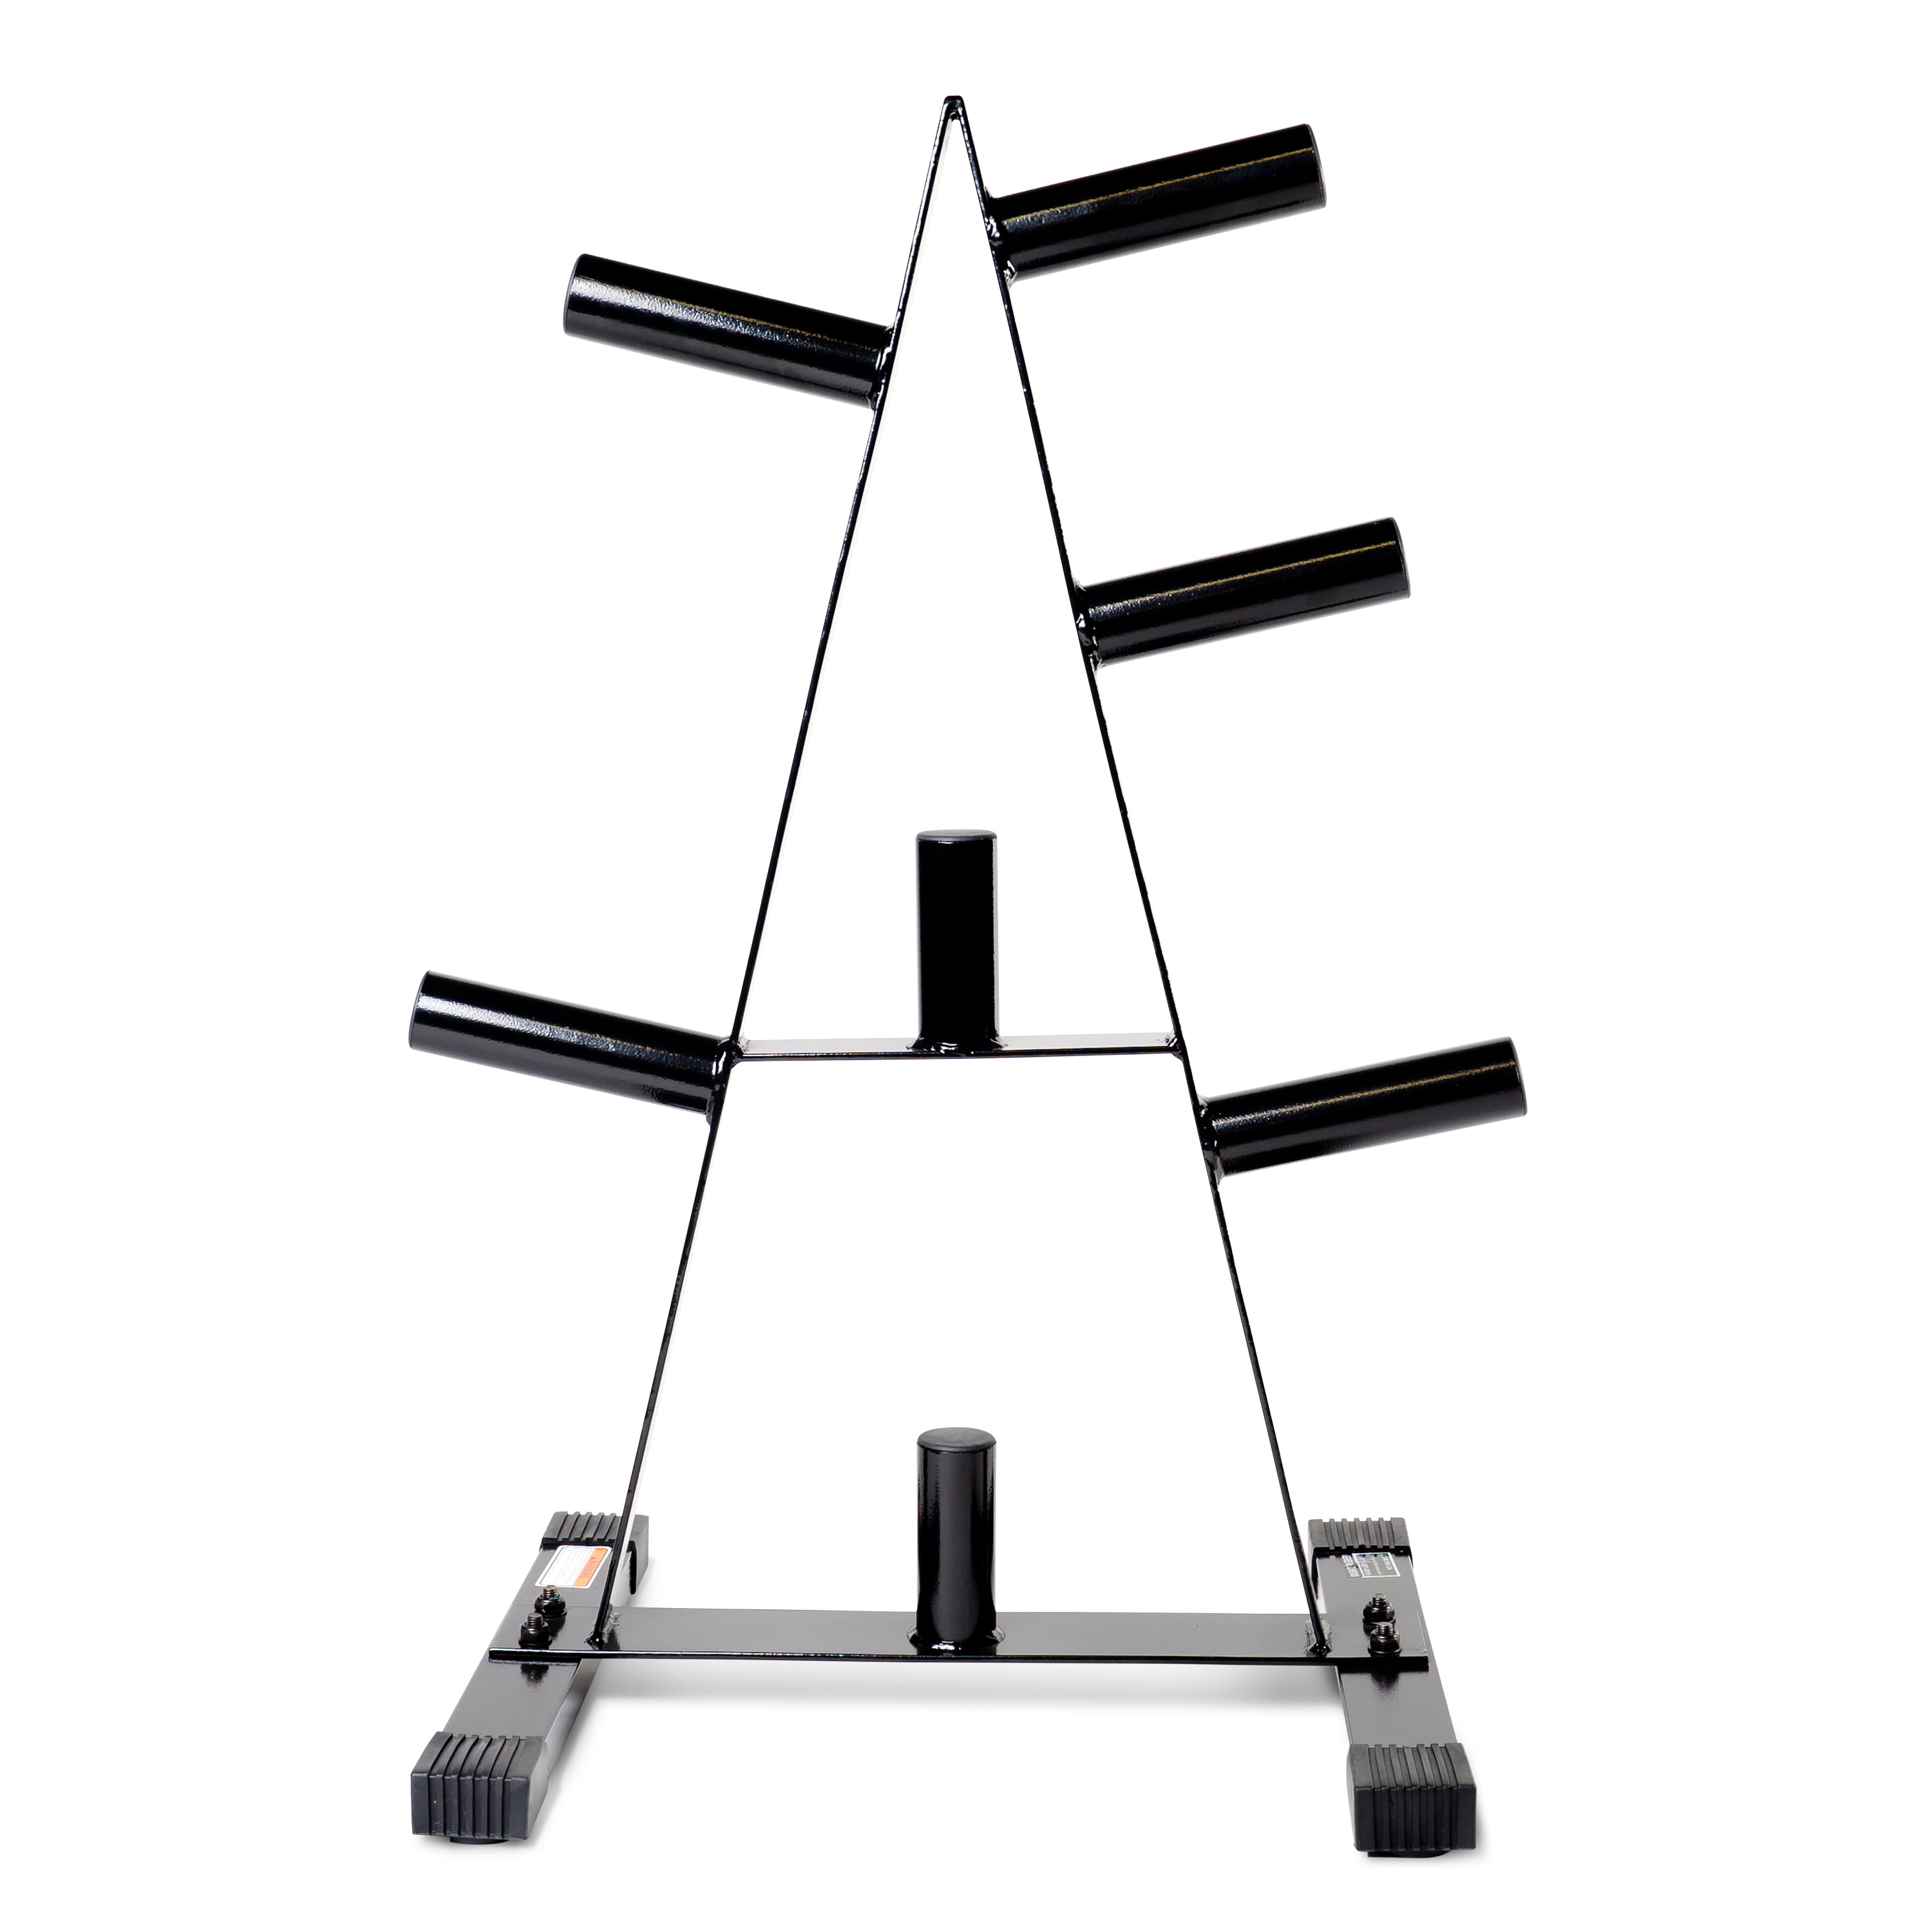 Cap Barbell Olympic Plate Weight Tree Storage Rack Home Gym Equipment